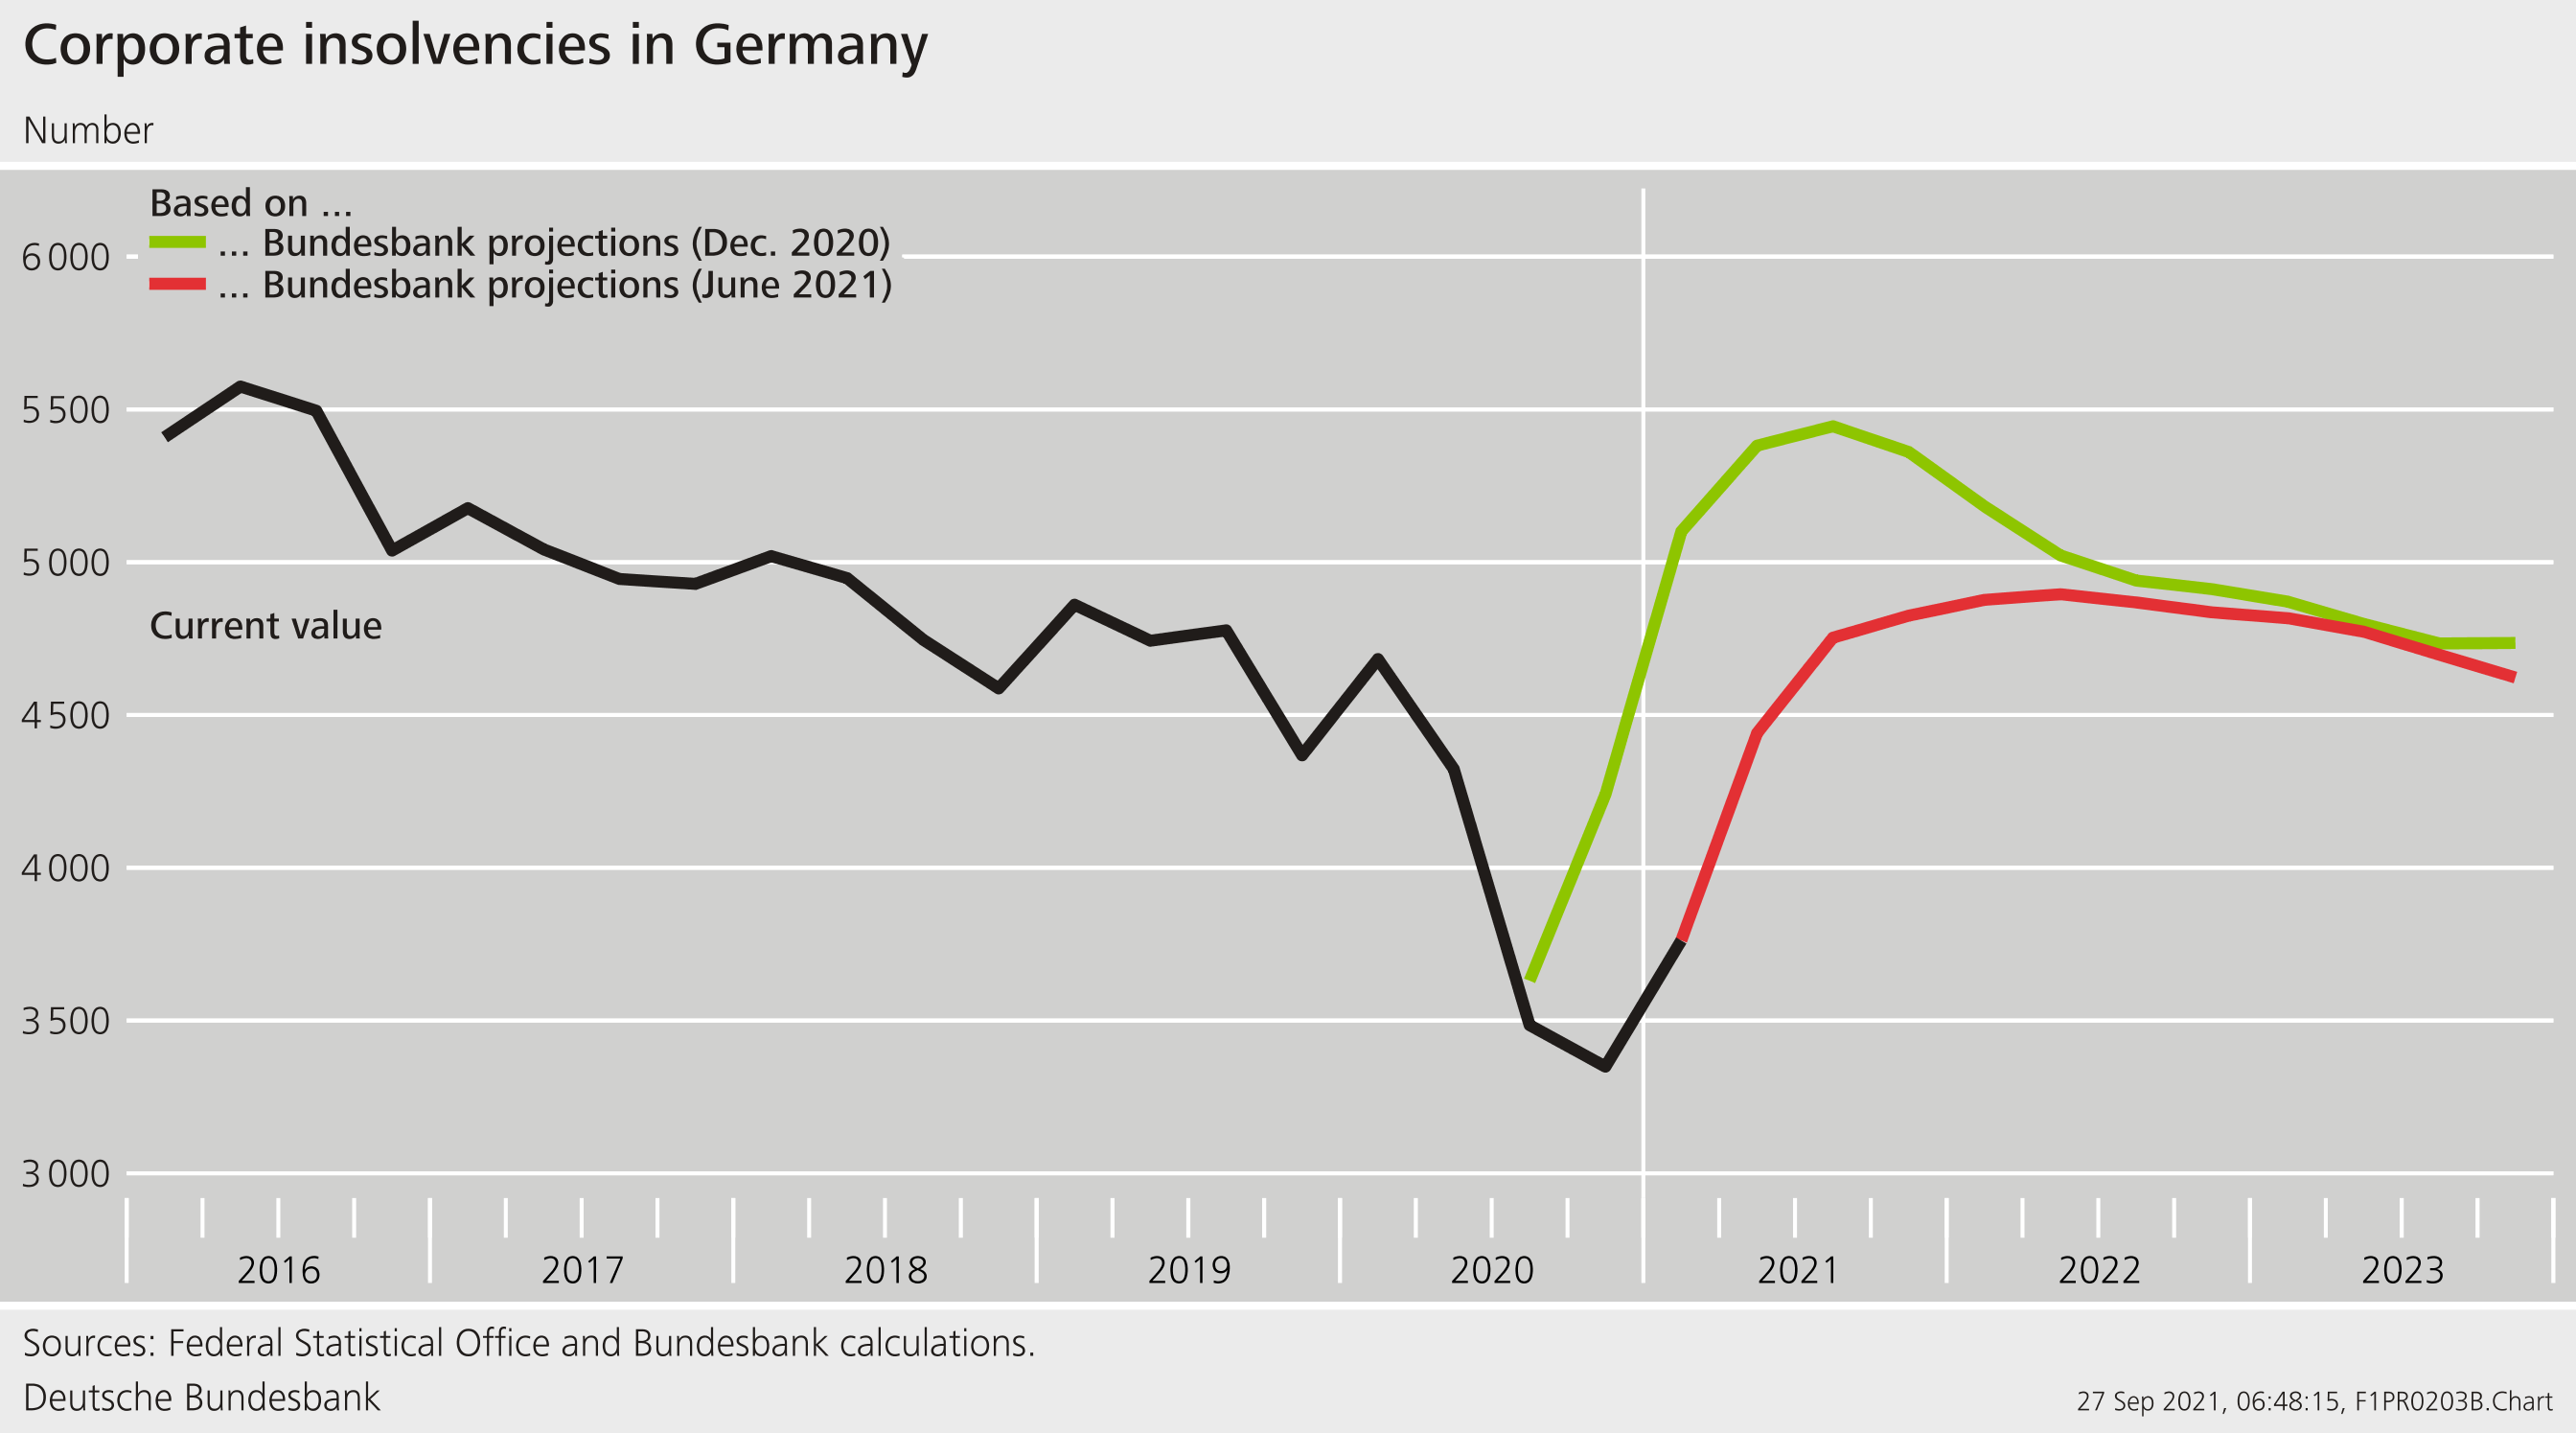 Graph 2: Corporate insolvencies in Germany